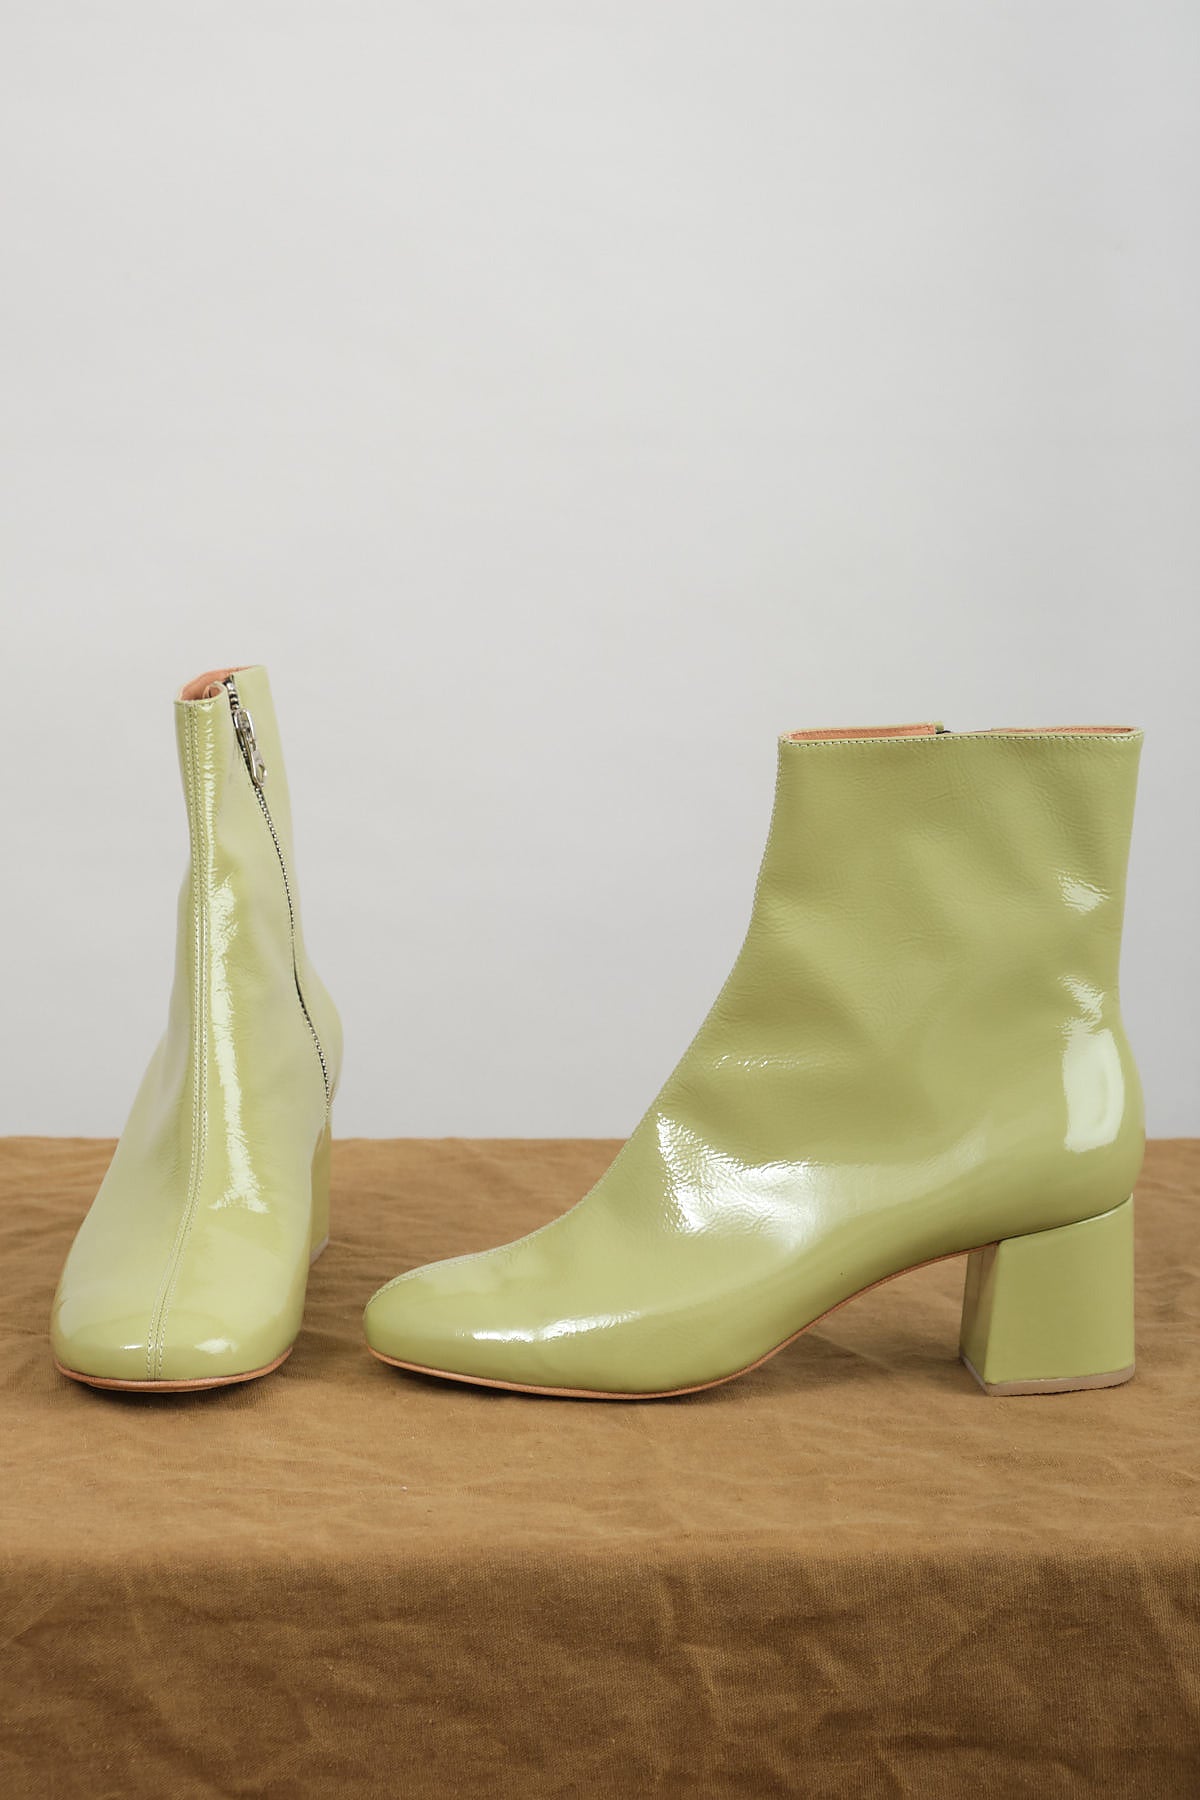 Healed Leather Sugar Bootie in Pistachio with Slim 100%